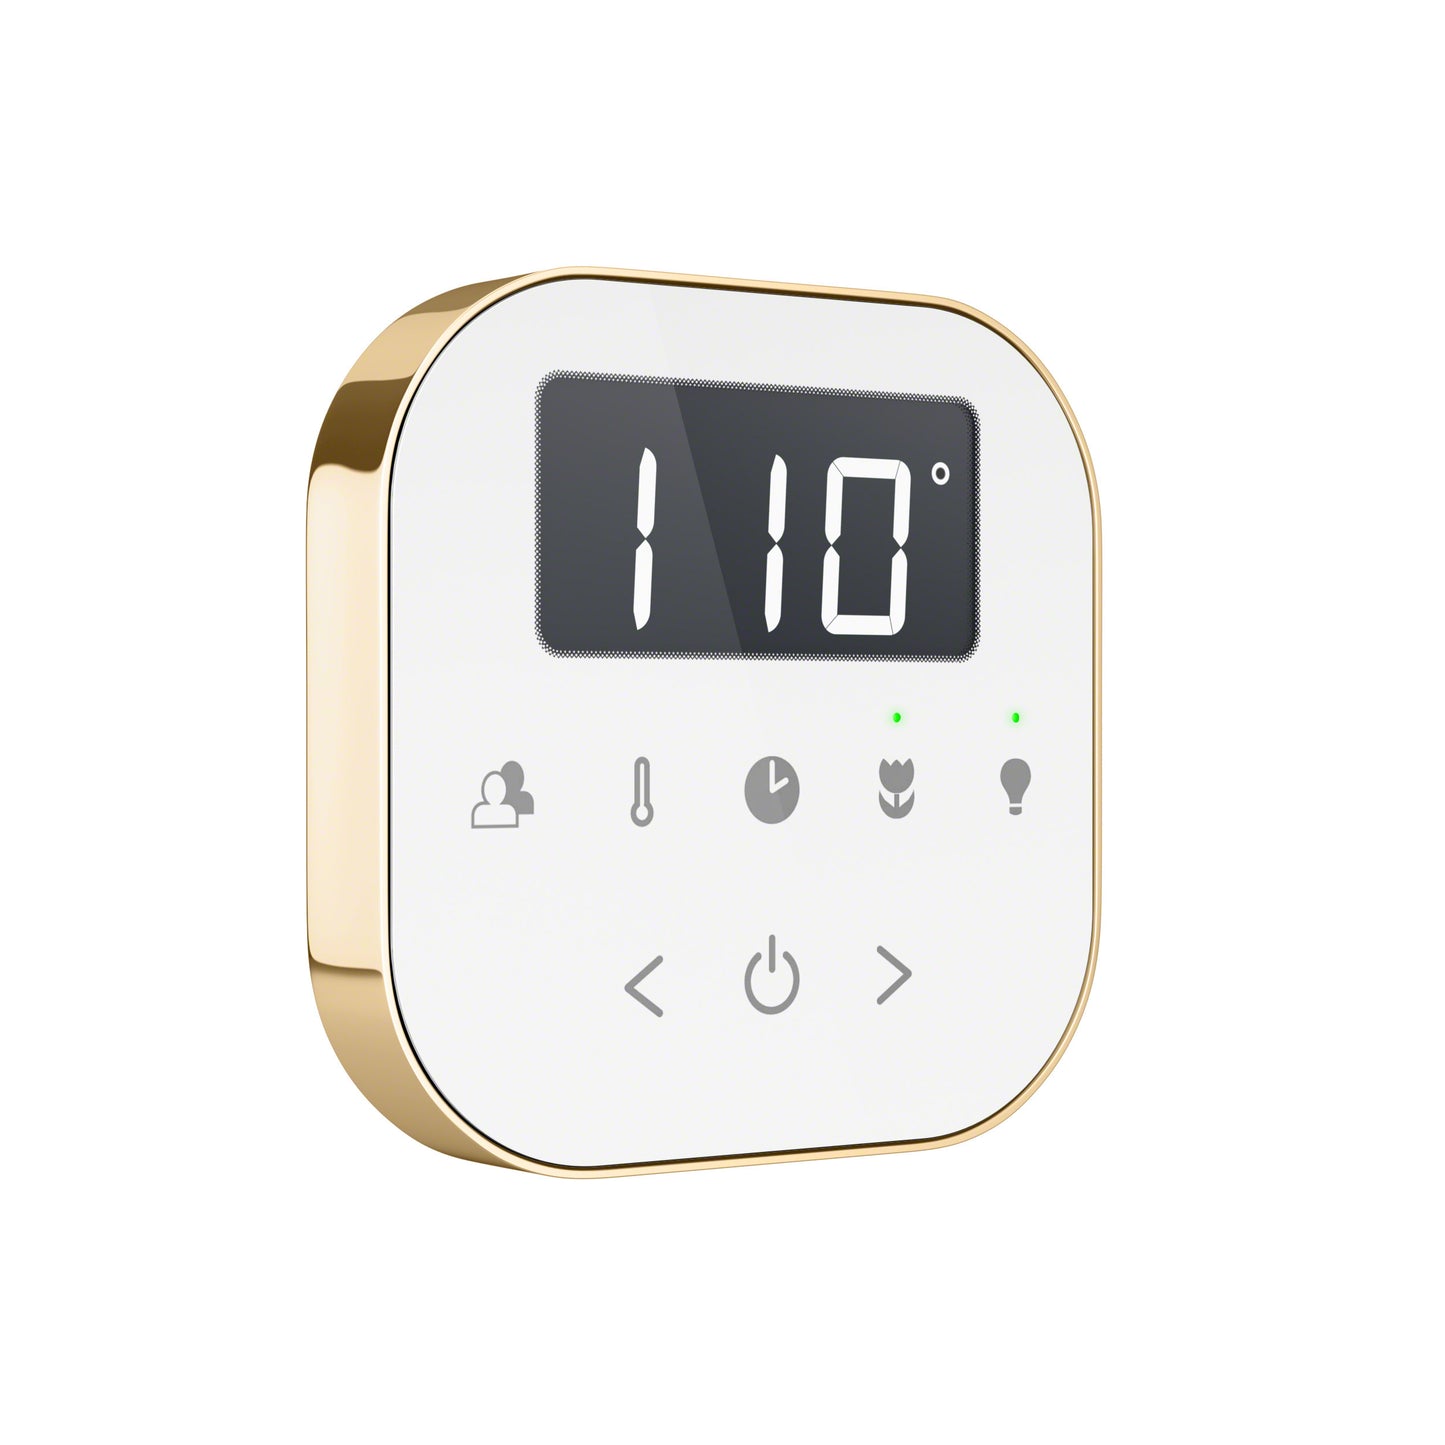 AirTempo Steam Shower Control in White with Polished Brass